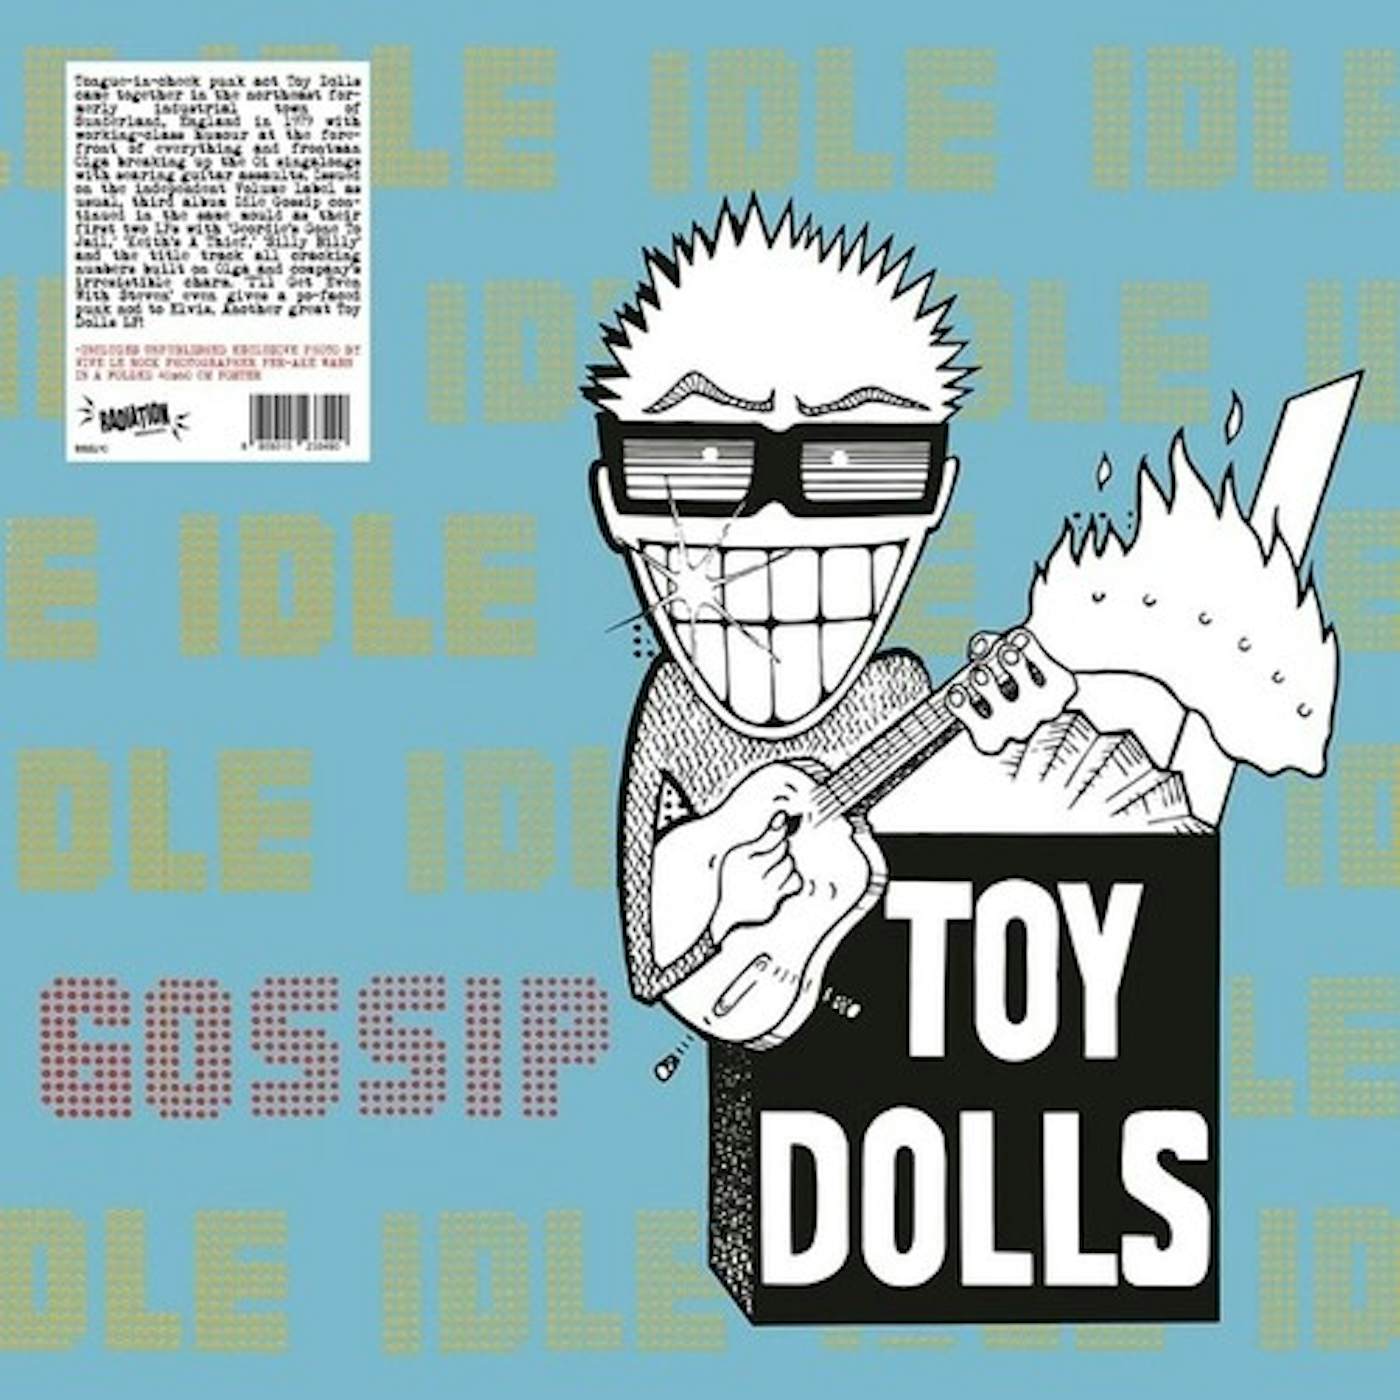 The Toy Dolls Idle Gossip (Colored) Vinyl Record